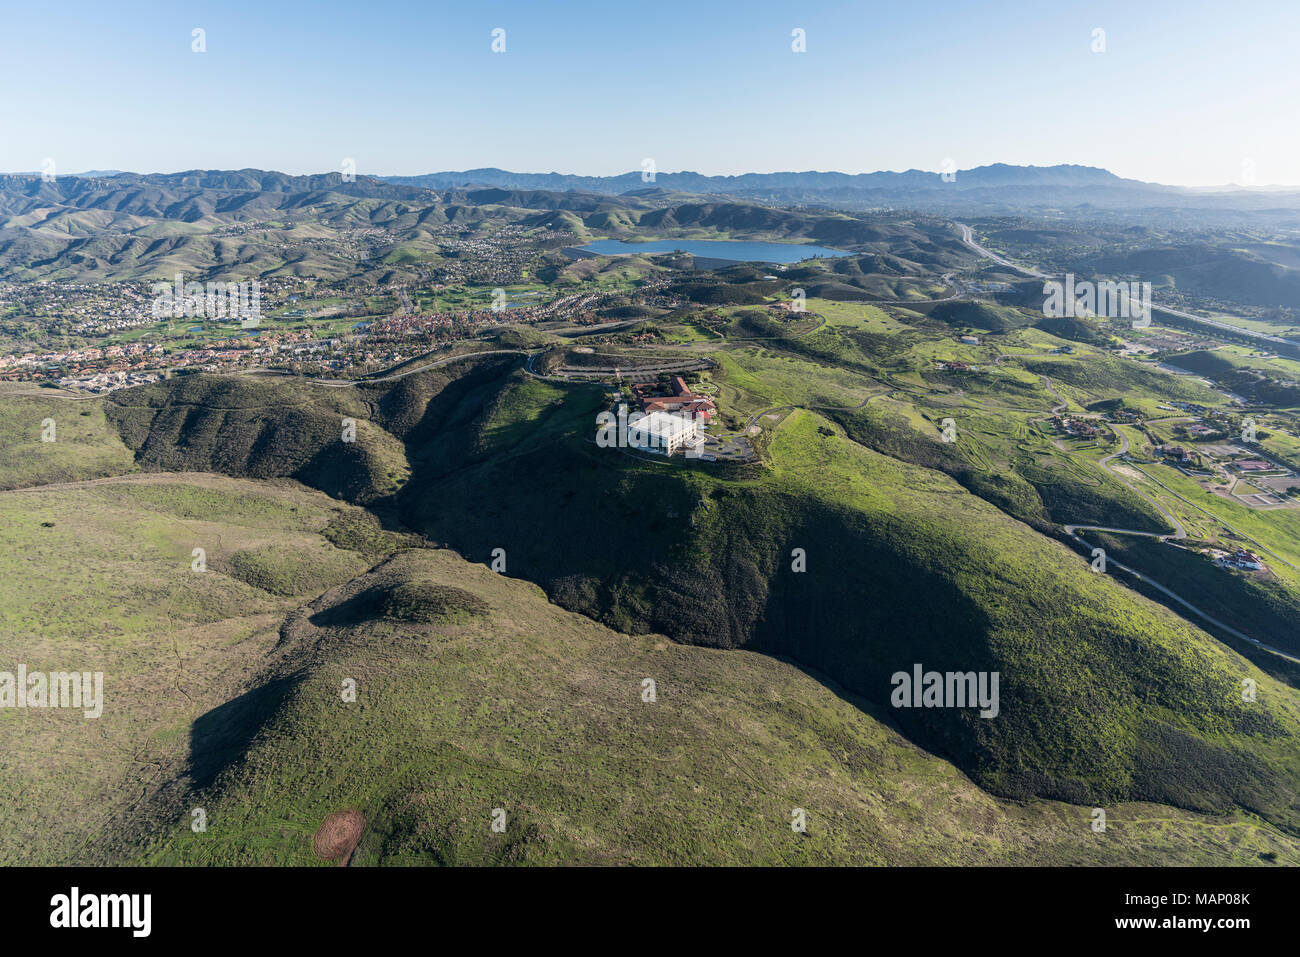 Aerial view of Simi Valley ranch lands and the Ronald Reagan Presidential Library in Ventura County California. Stock Photo